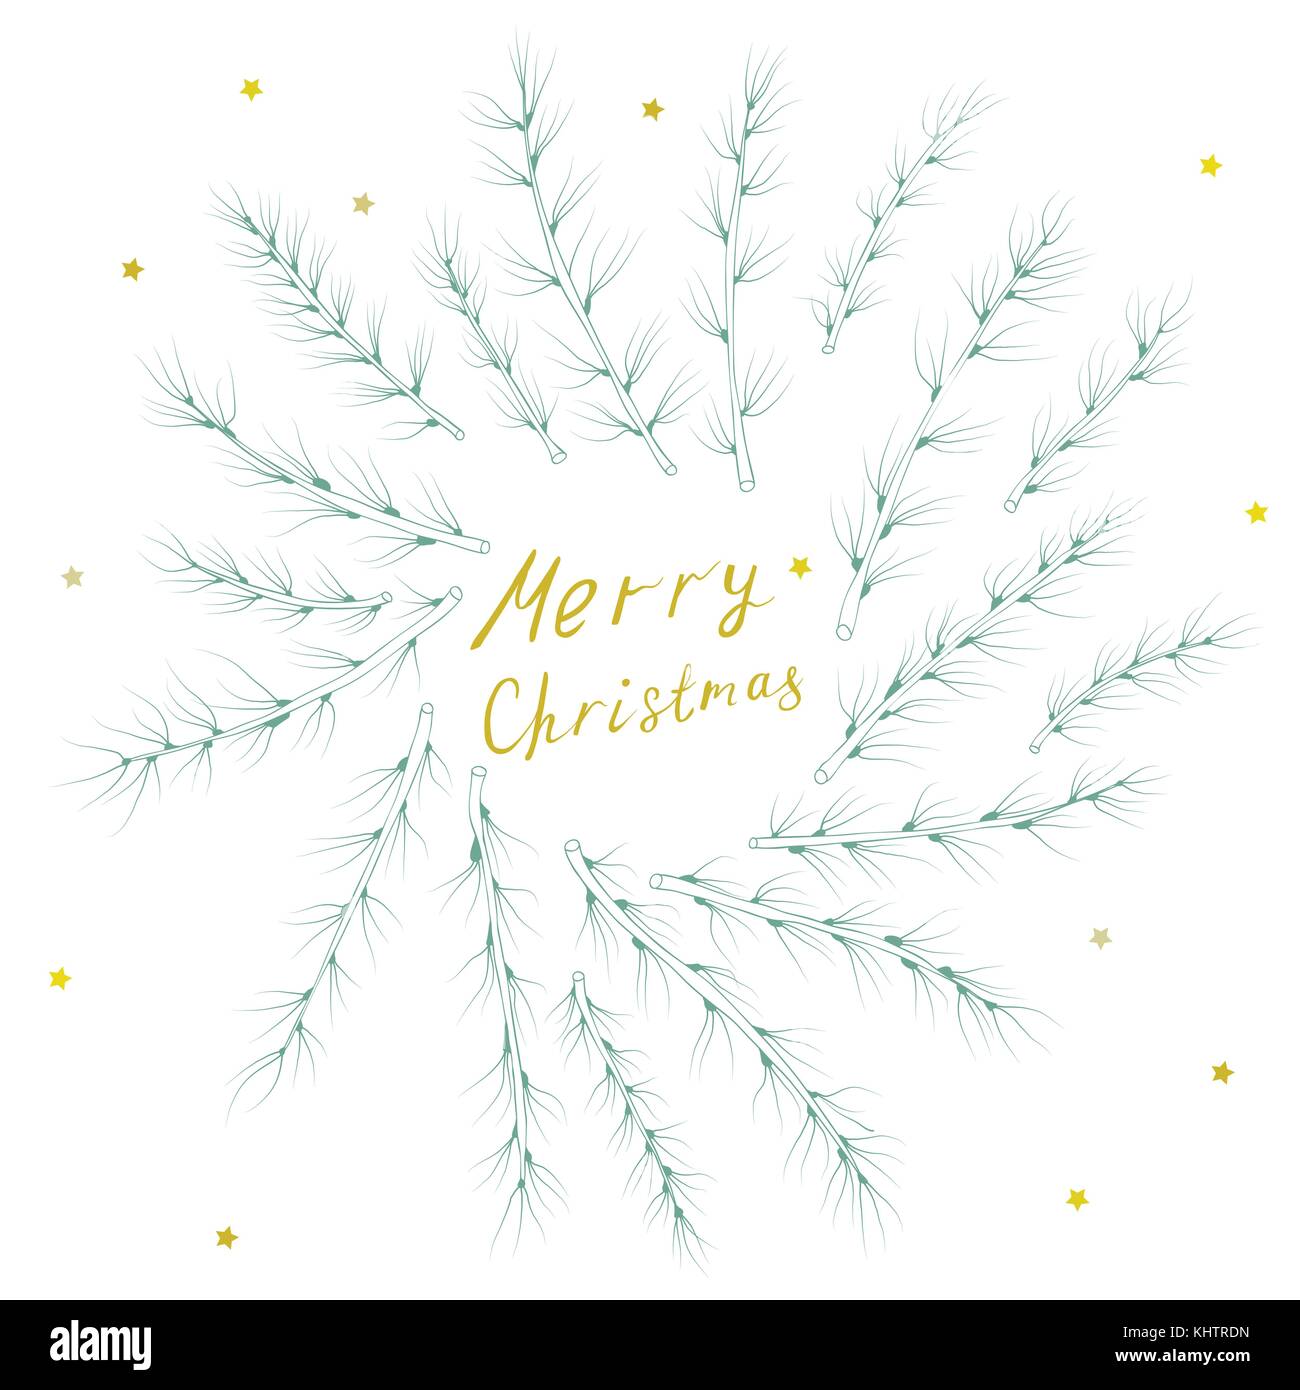 Christmas card with hand drown conifer branches and lettering Stock Vector